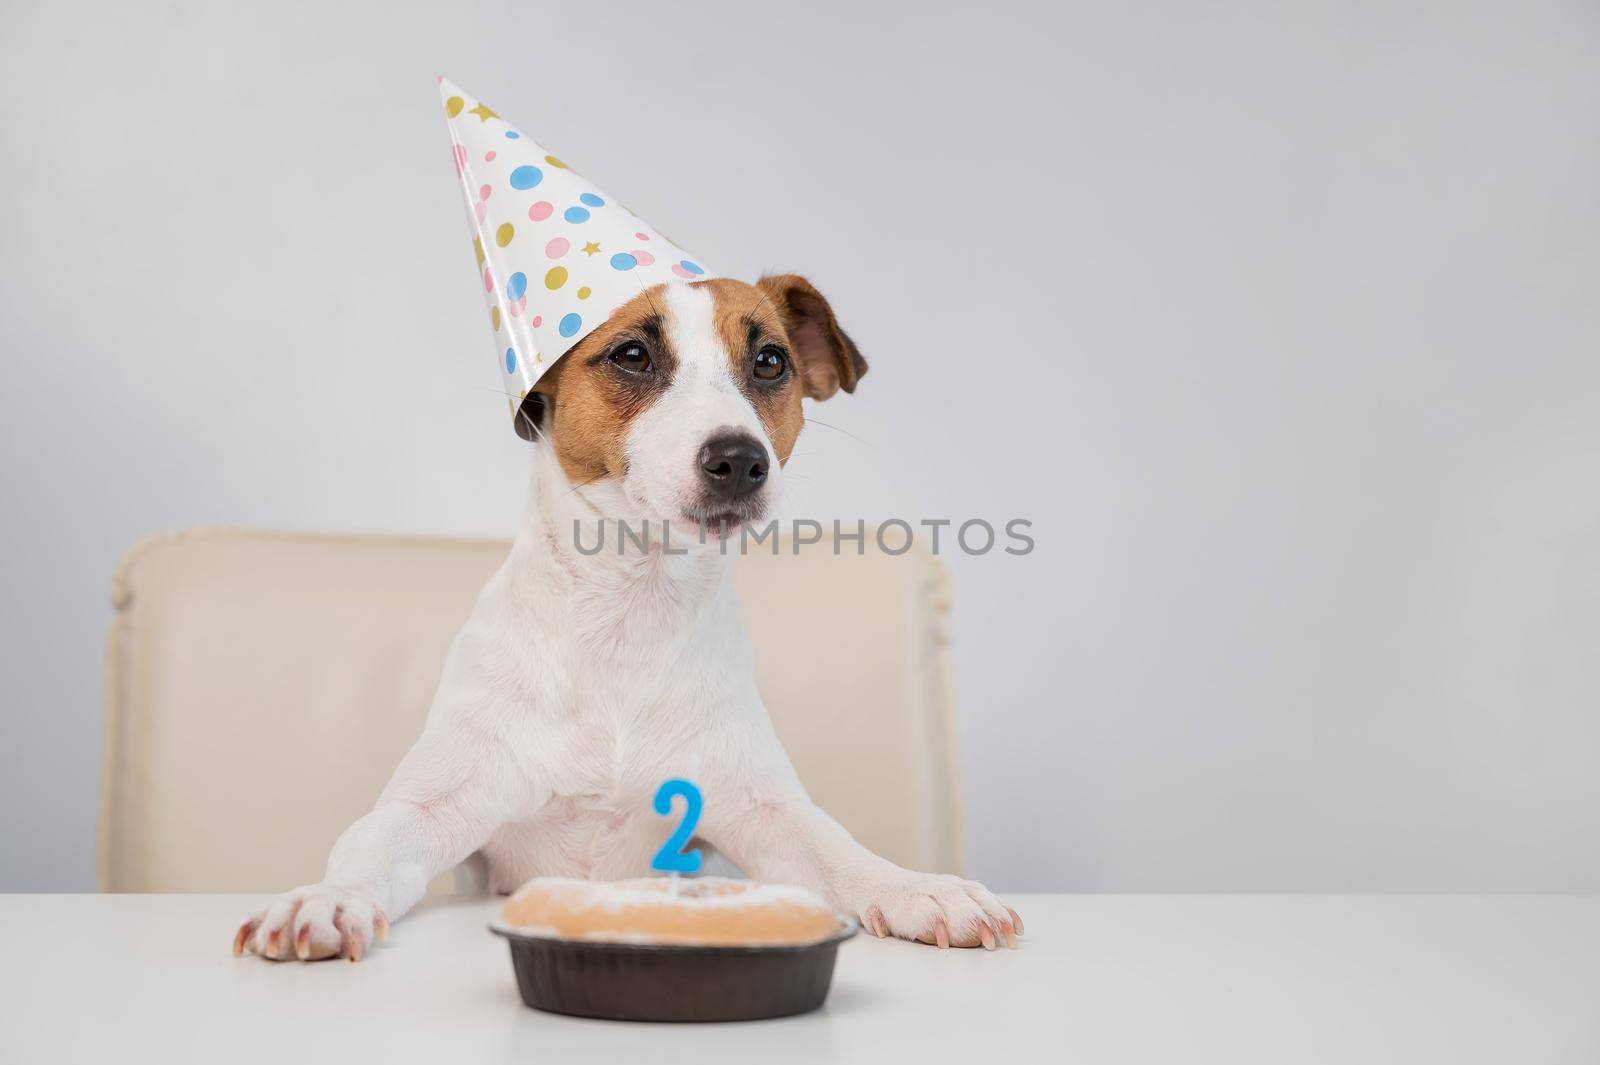 Jack russell terrier in a festive cap by a pie with a candle on a white background. The dog is celebrating its second birthday.